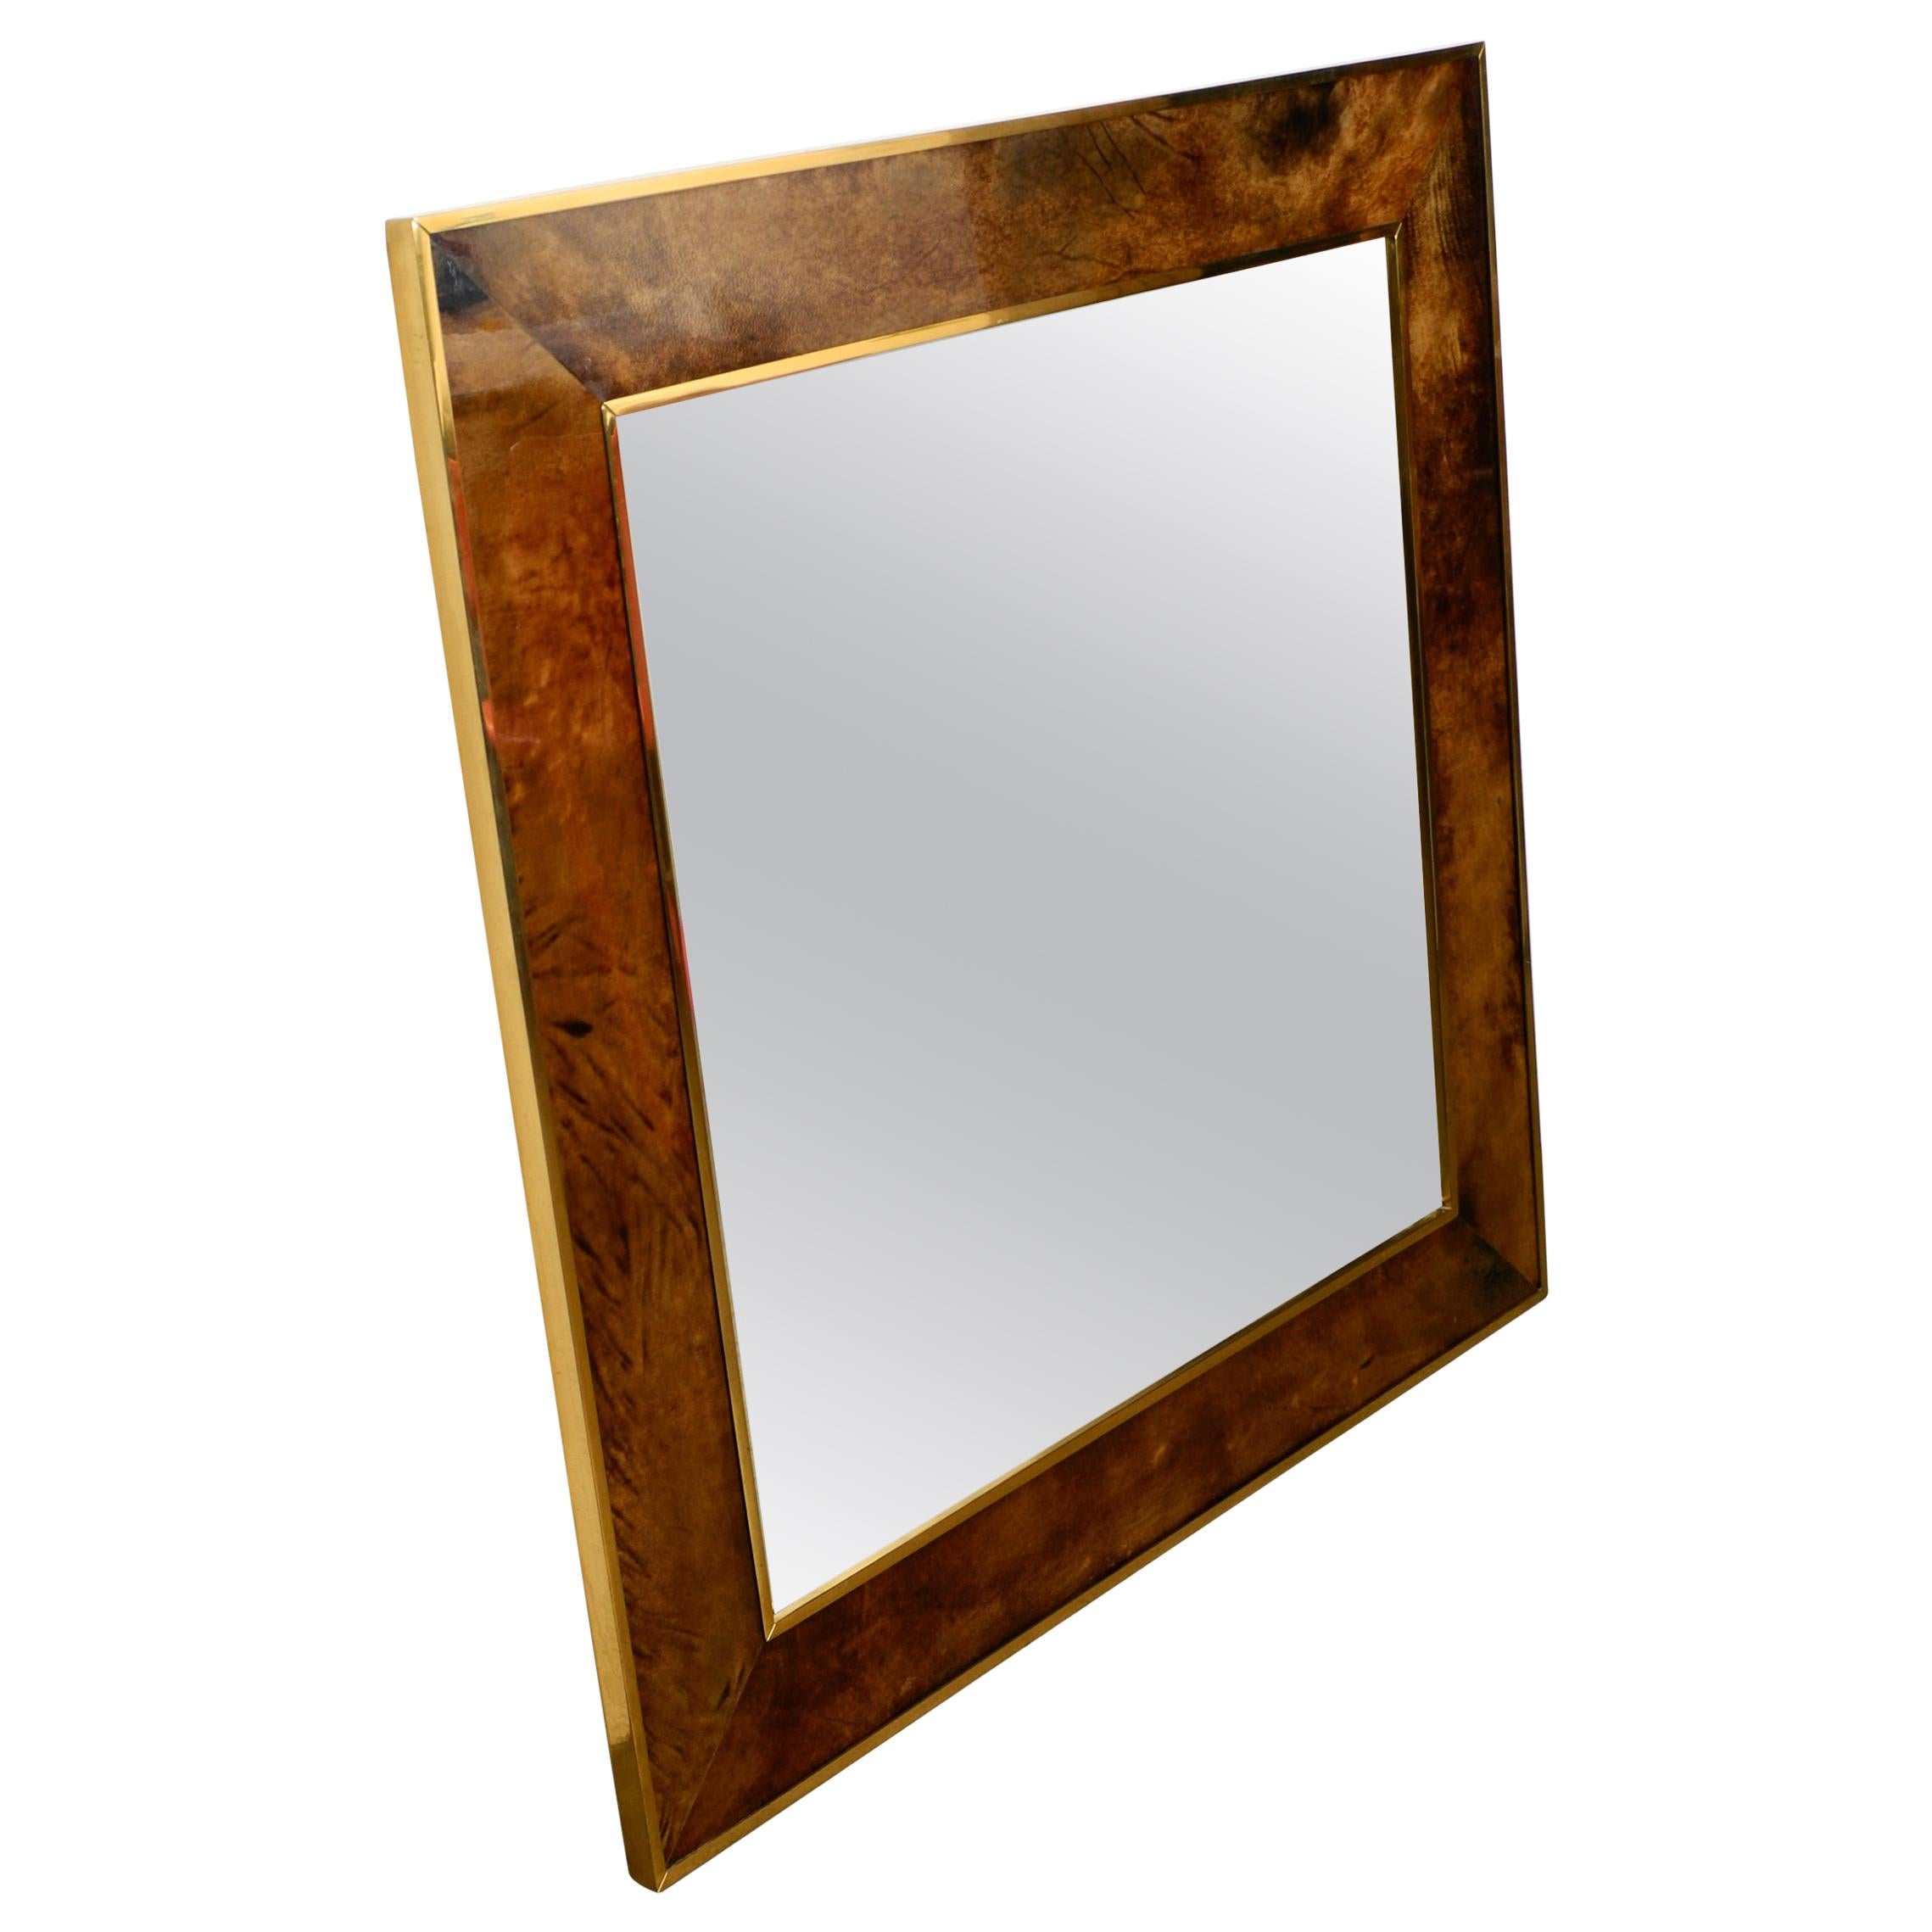 Extra Large Wall Mirror by Aldo Tura Made of Brass and Leather Made in Italy